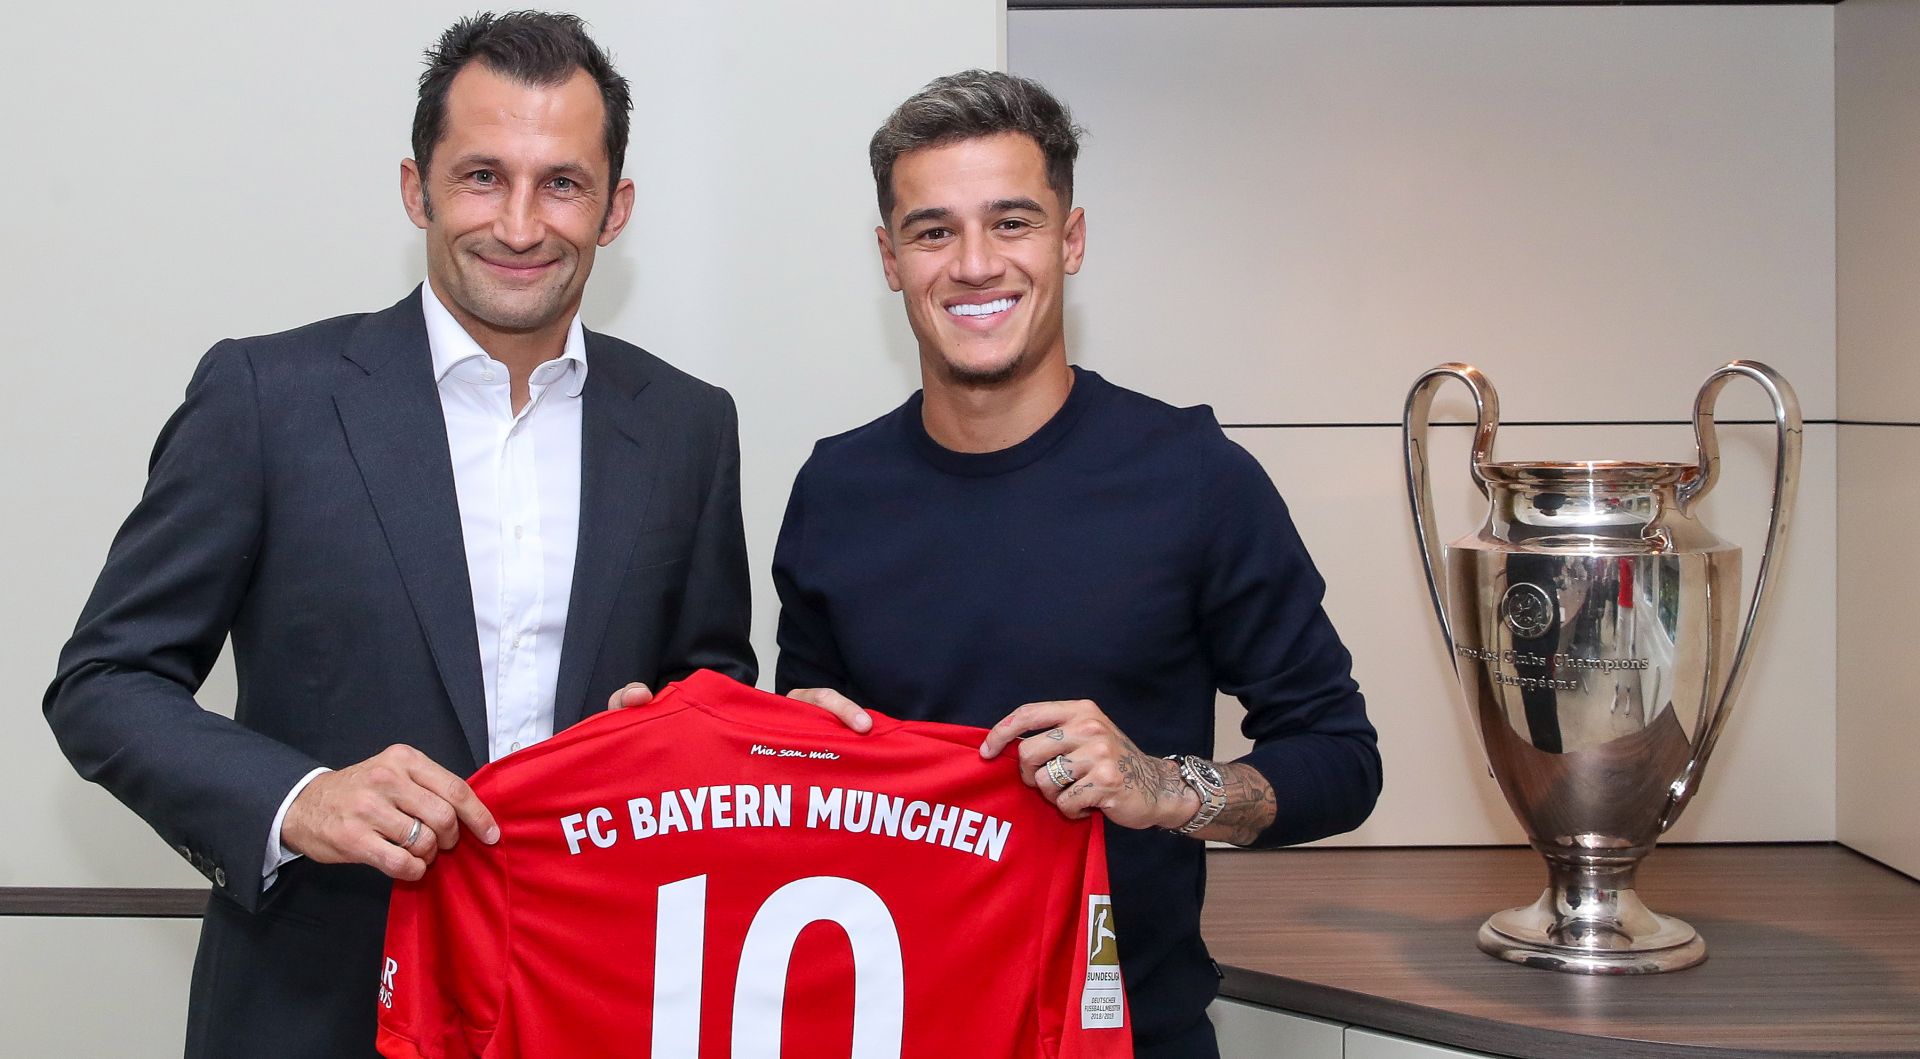 epa07780287 A handout photo made available by  FC Bayern Munich on 19 August 2019 shows Bayern's director of sport Hasan Salihamidzic (L) and Bayern's new player Philippe Coutinho from Brazil posing with Coutinhos's jersey next to the UEFA Champions League trophy in Munich, Germany, 18 August 2019. Coutinho will be presented oficcialy in the afternoon of 19 August 2019 in Munich.  EPA/HANDOUT  HANDOUT EDITORIAL USE ONLY/NO SALES